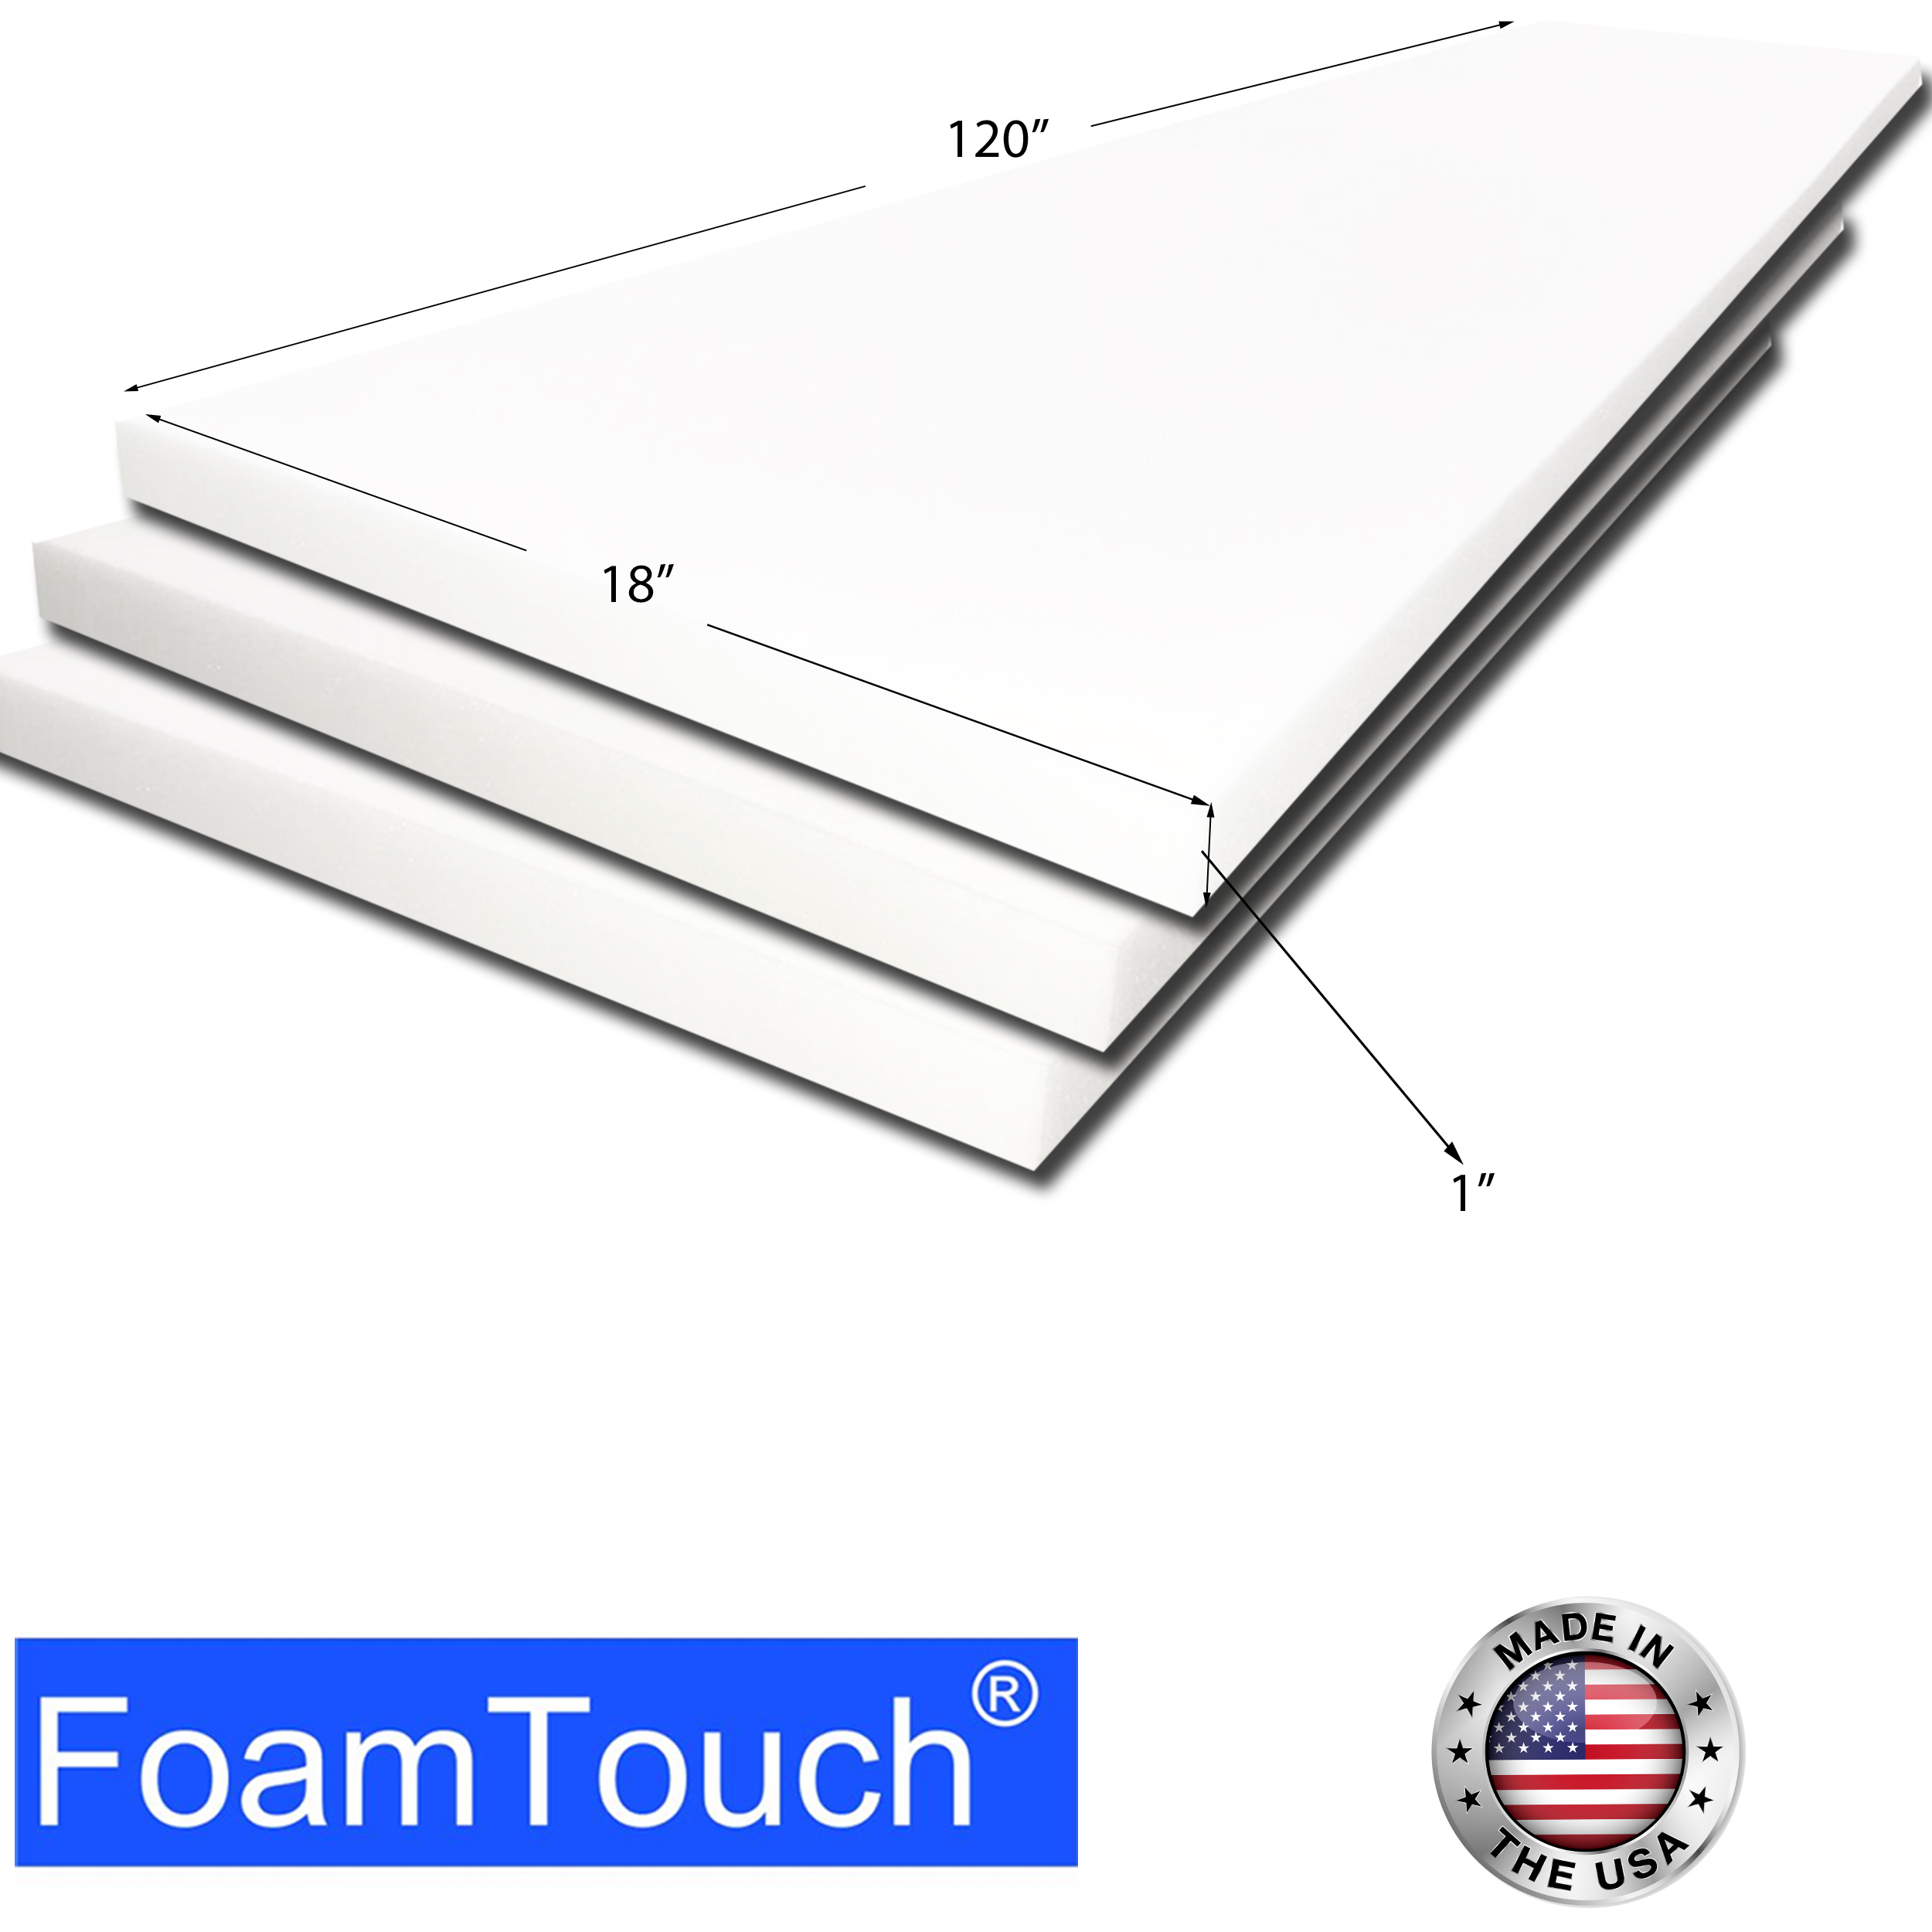 FoamTouch Upholstery Foam Cushion High Density 3 Height x 18 Width x 18  Length Made in USA